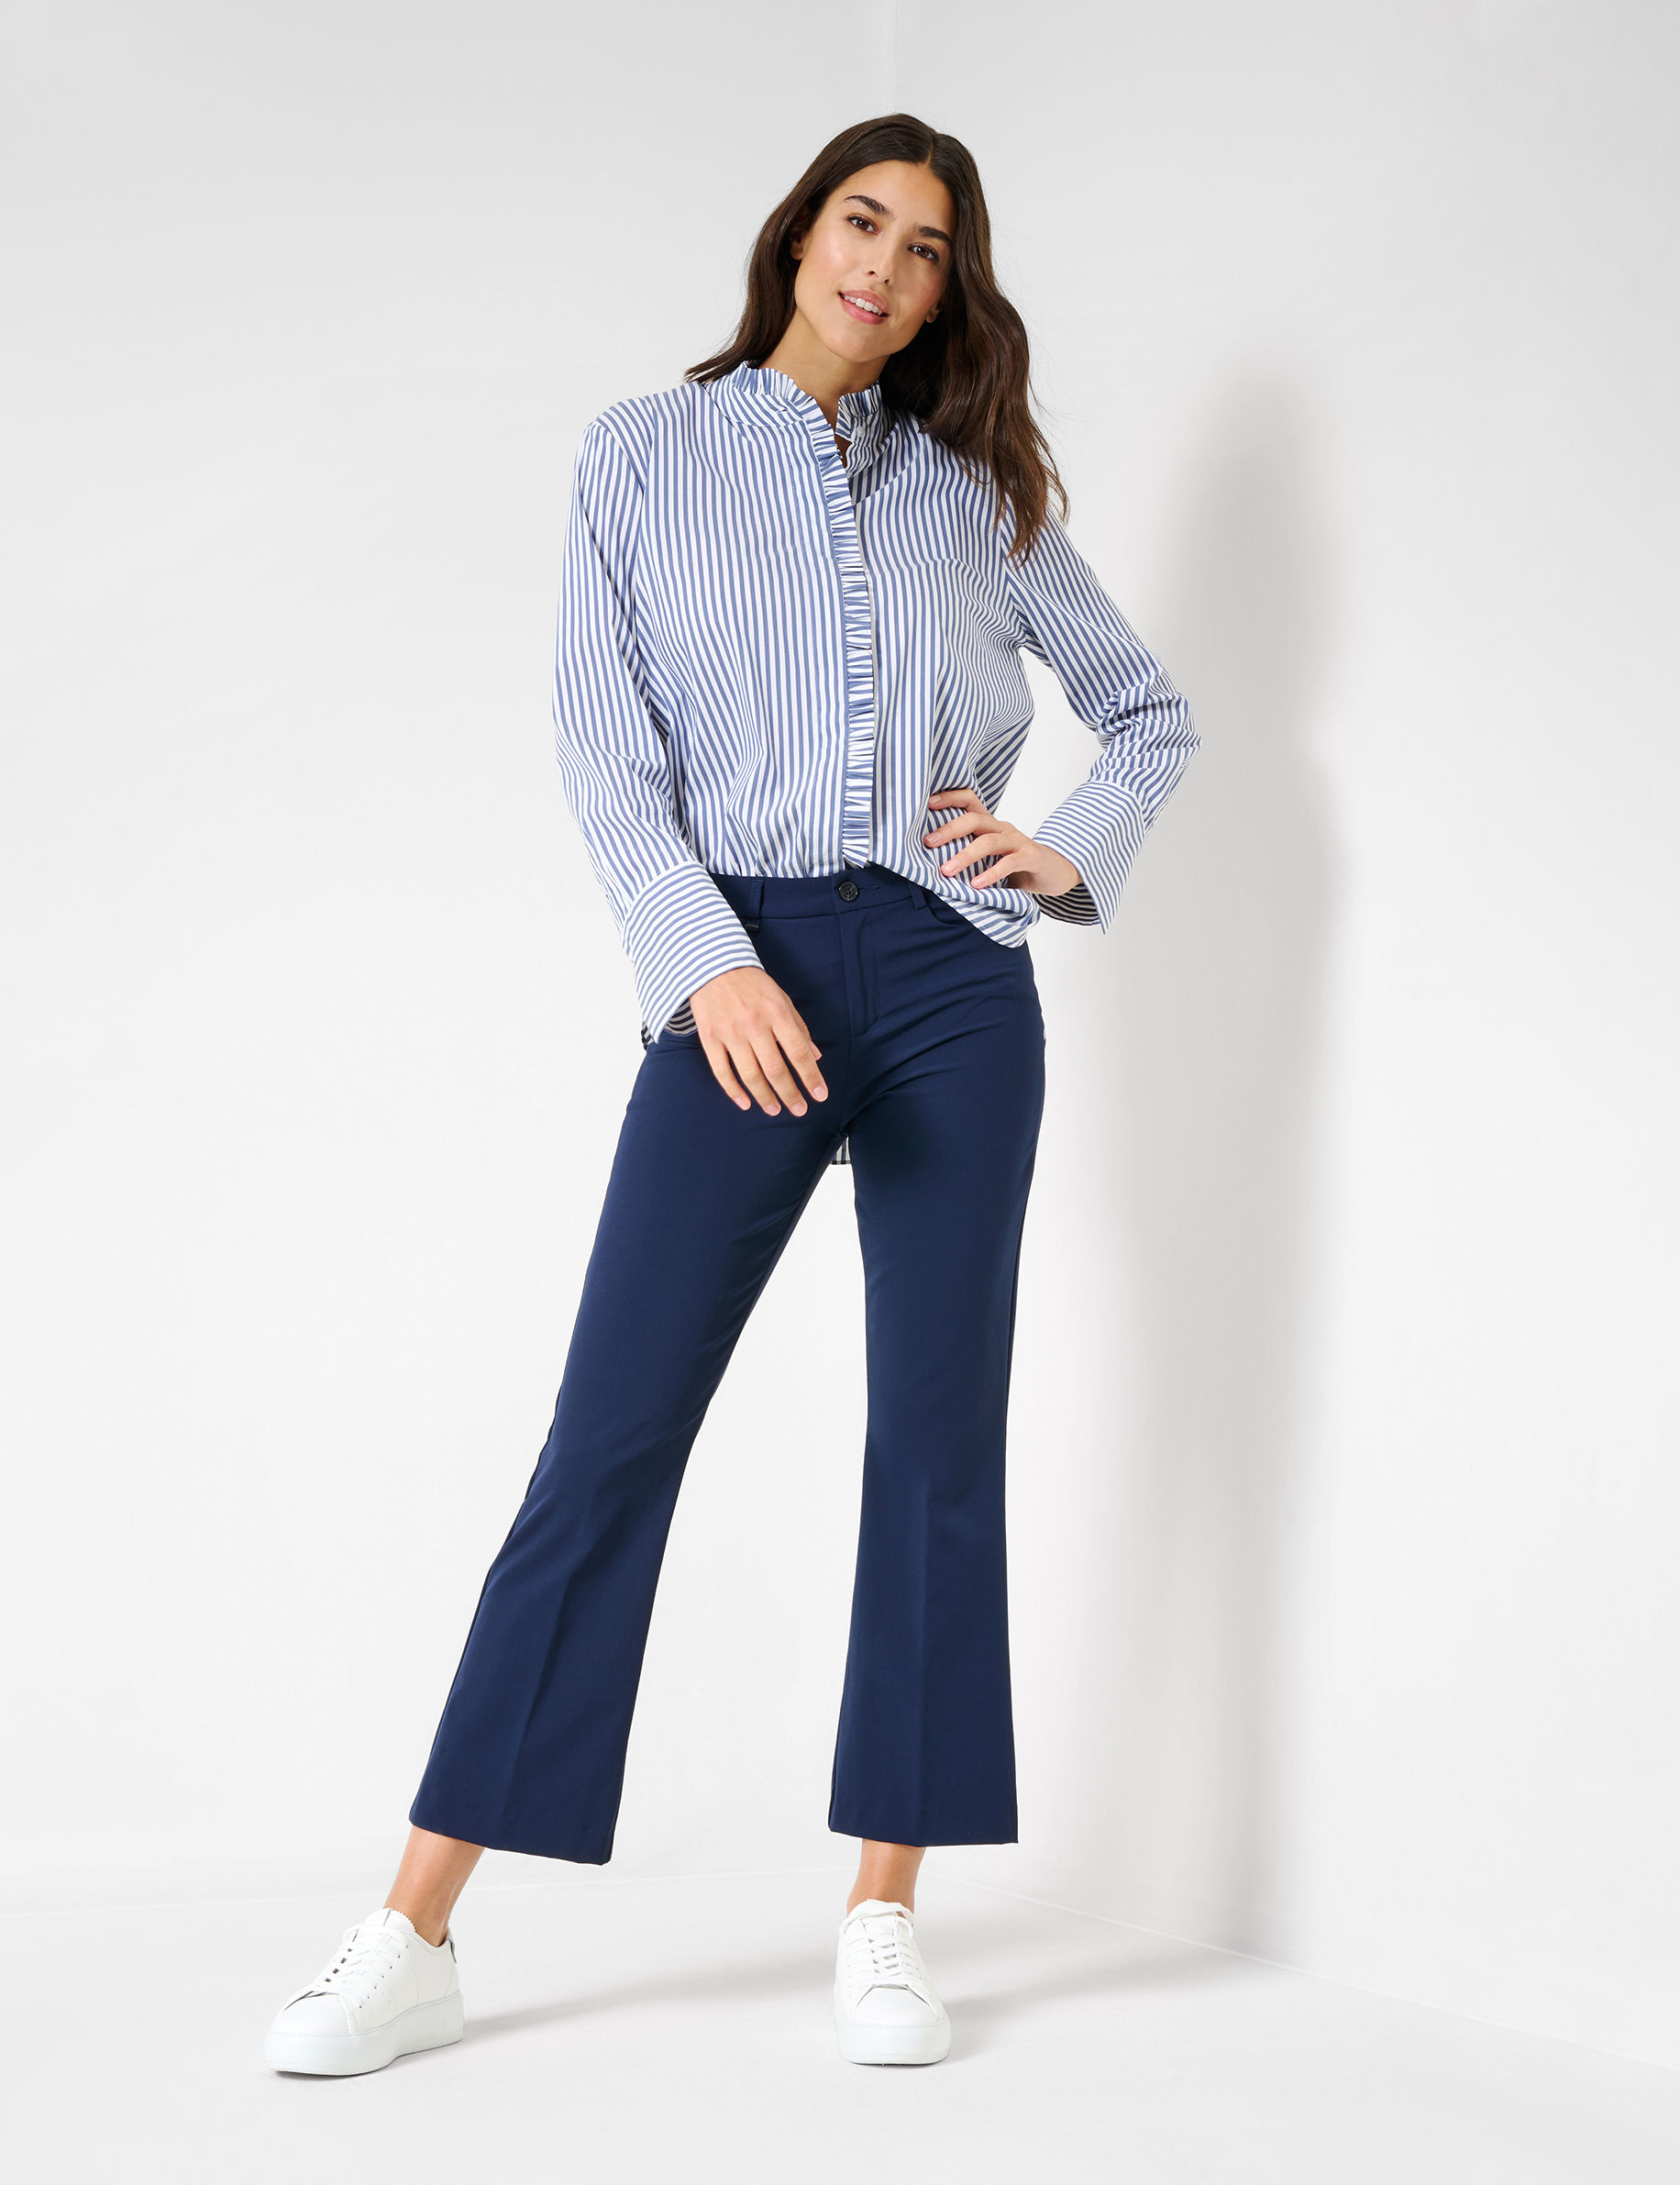 Women Style SHAKIRA S NAVY Slim Fit Model Outfit